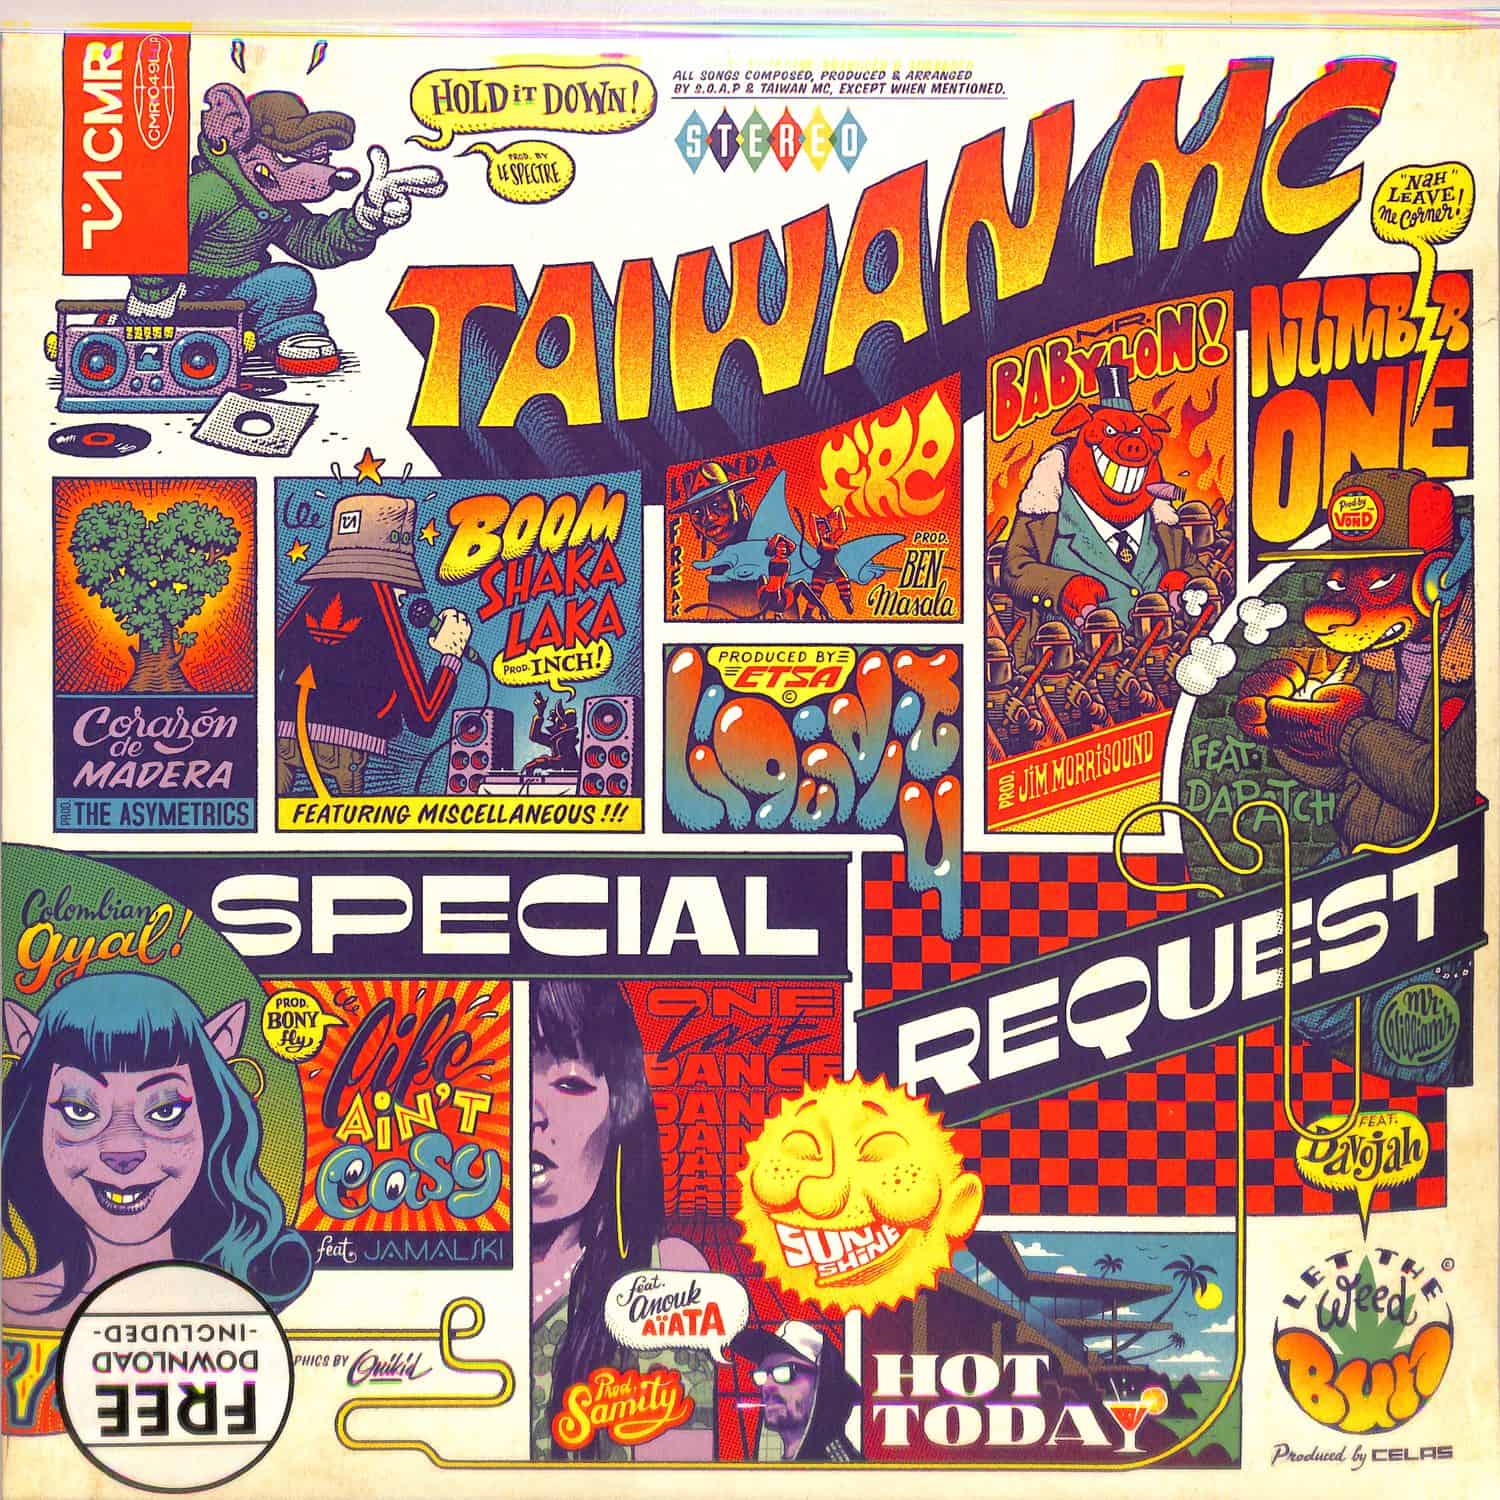 Taiwan MC - SPECIAL REQUEST 